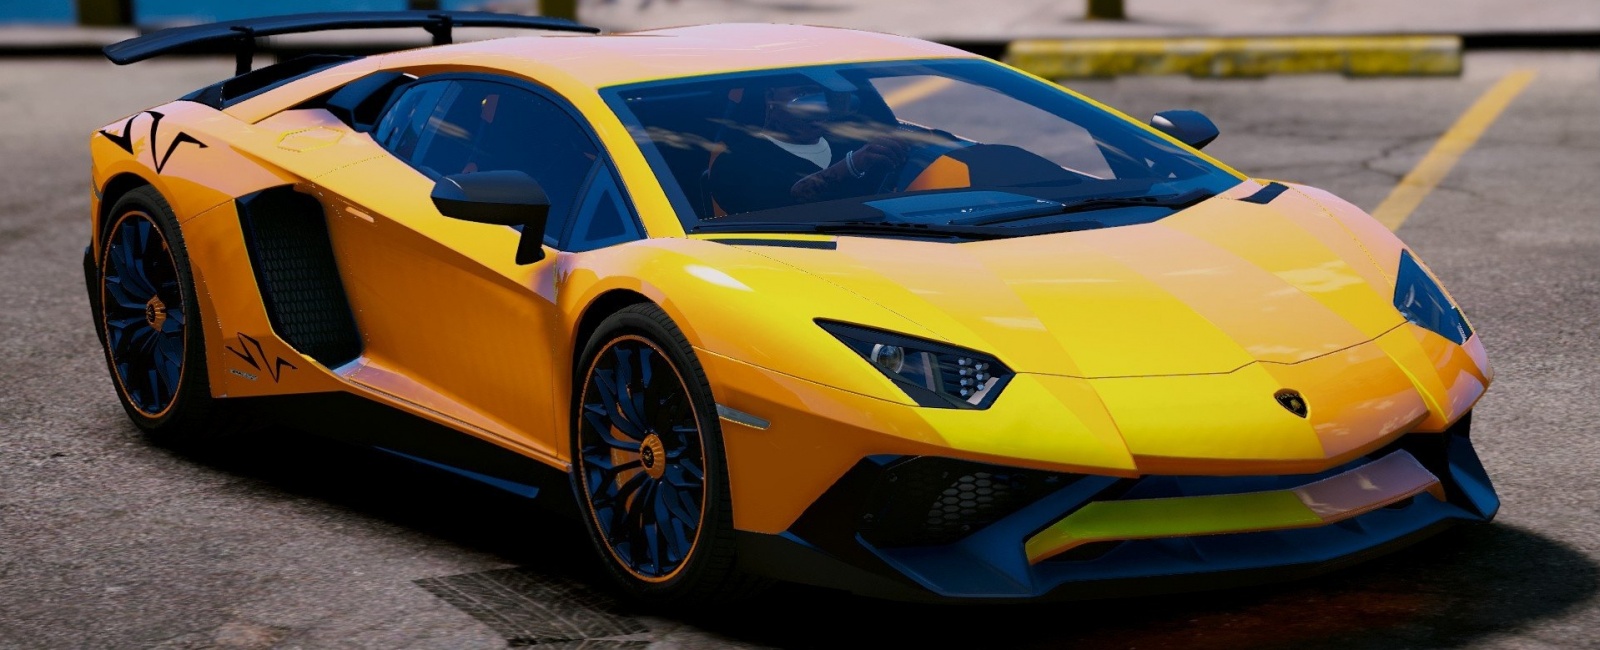 FiveM removal of real-world cars from GTA RP still to happen